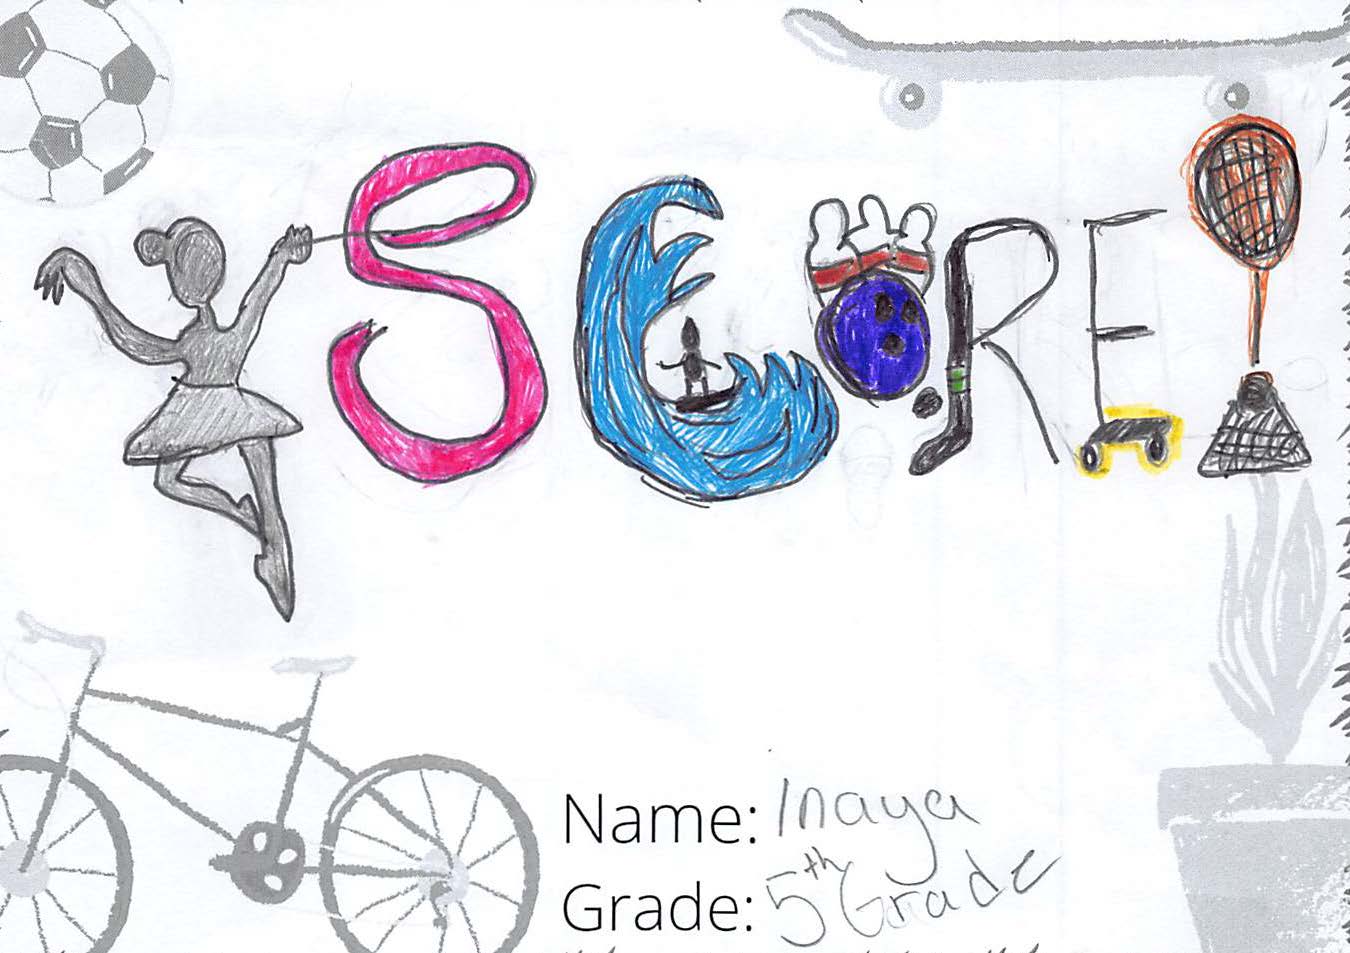 Pencil crayon drawing for the SCORE! logo contest. The drawing is colourful and includes many sports and activities.